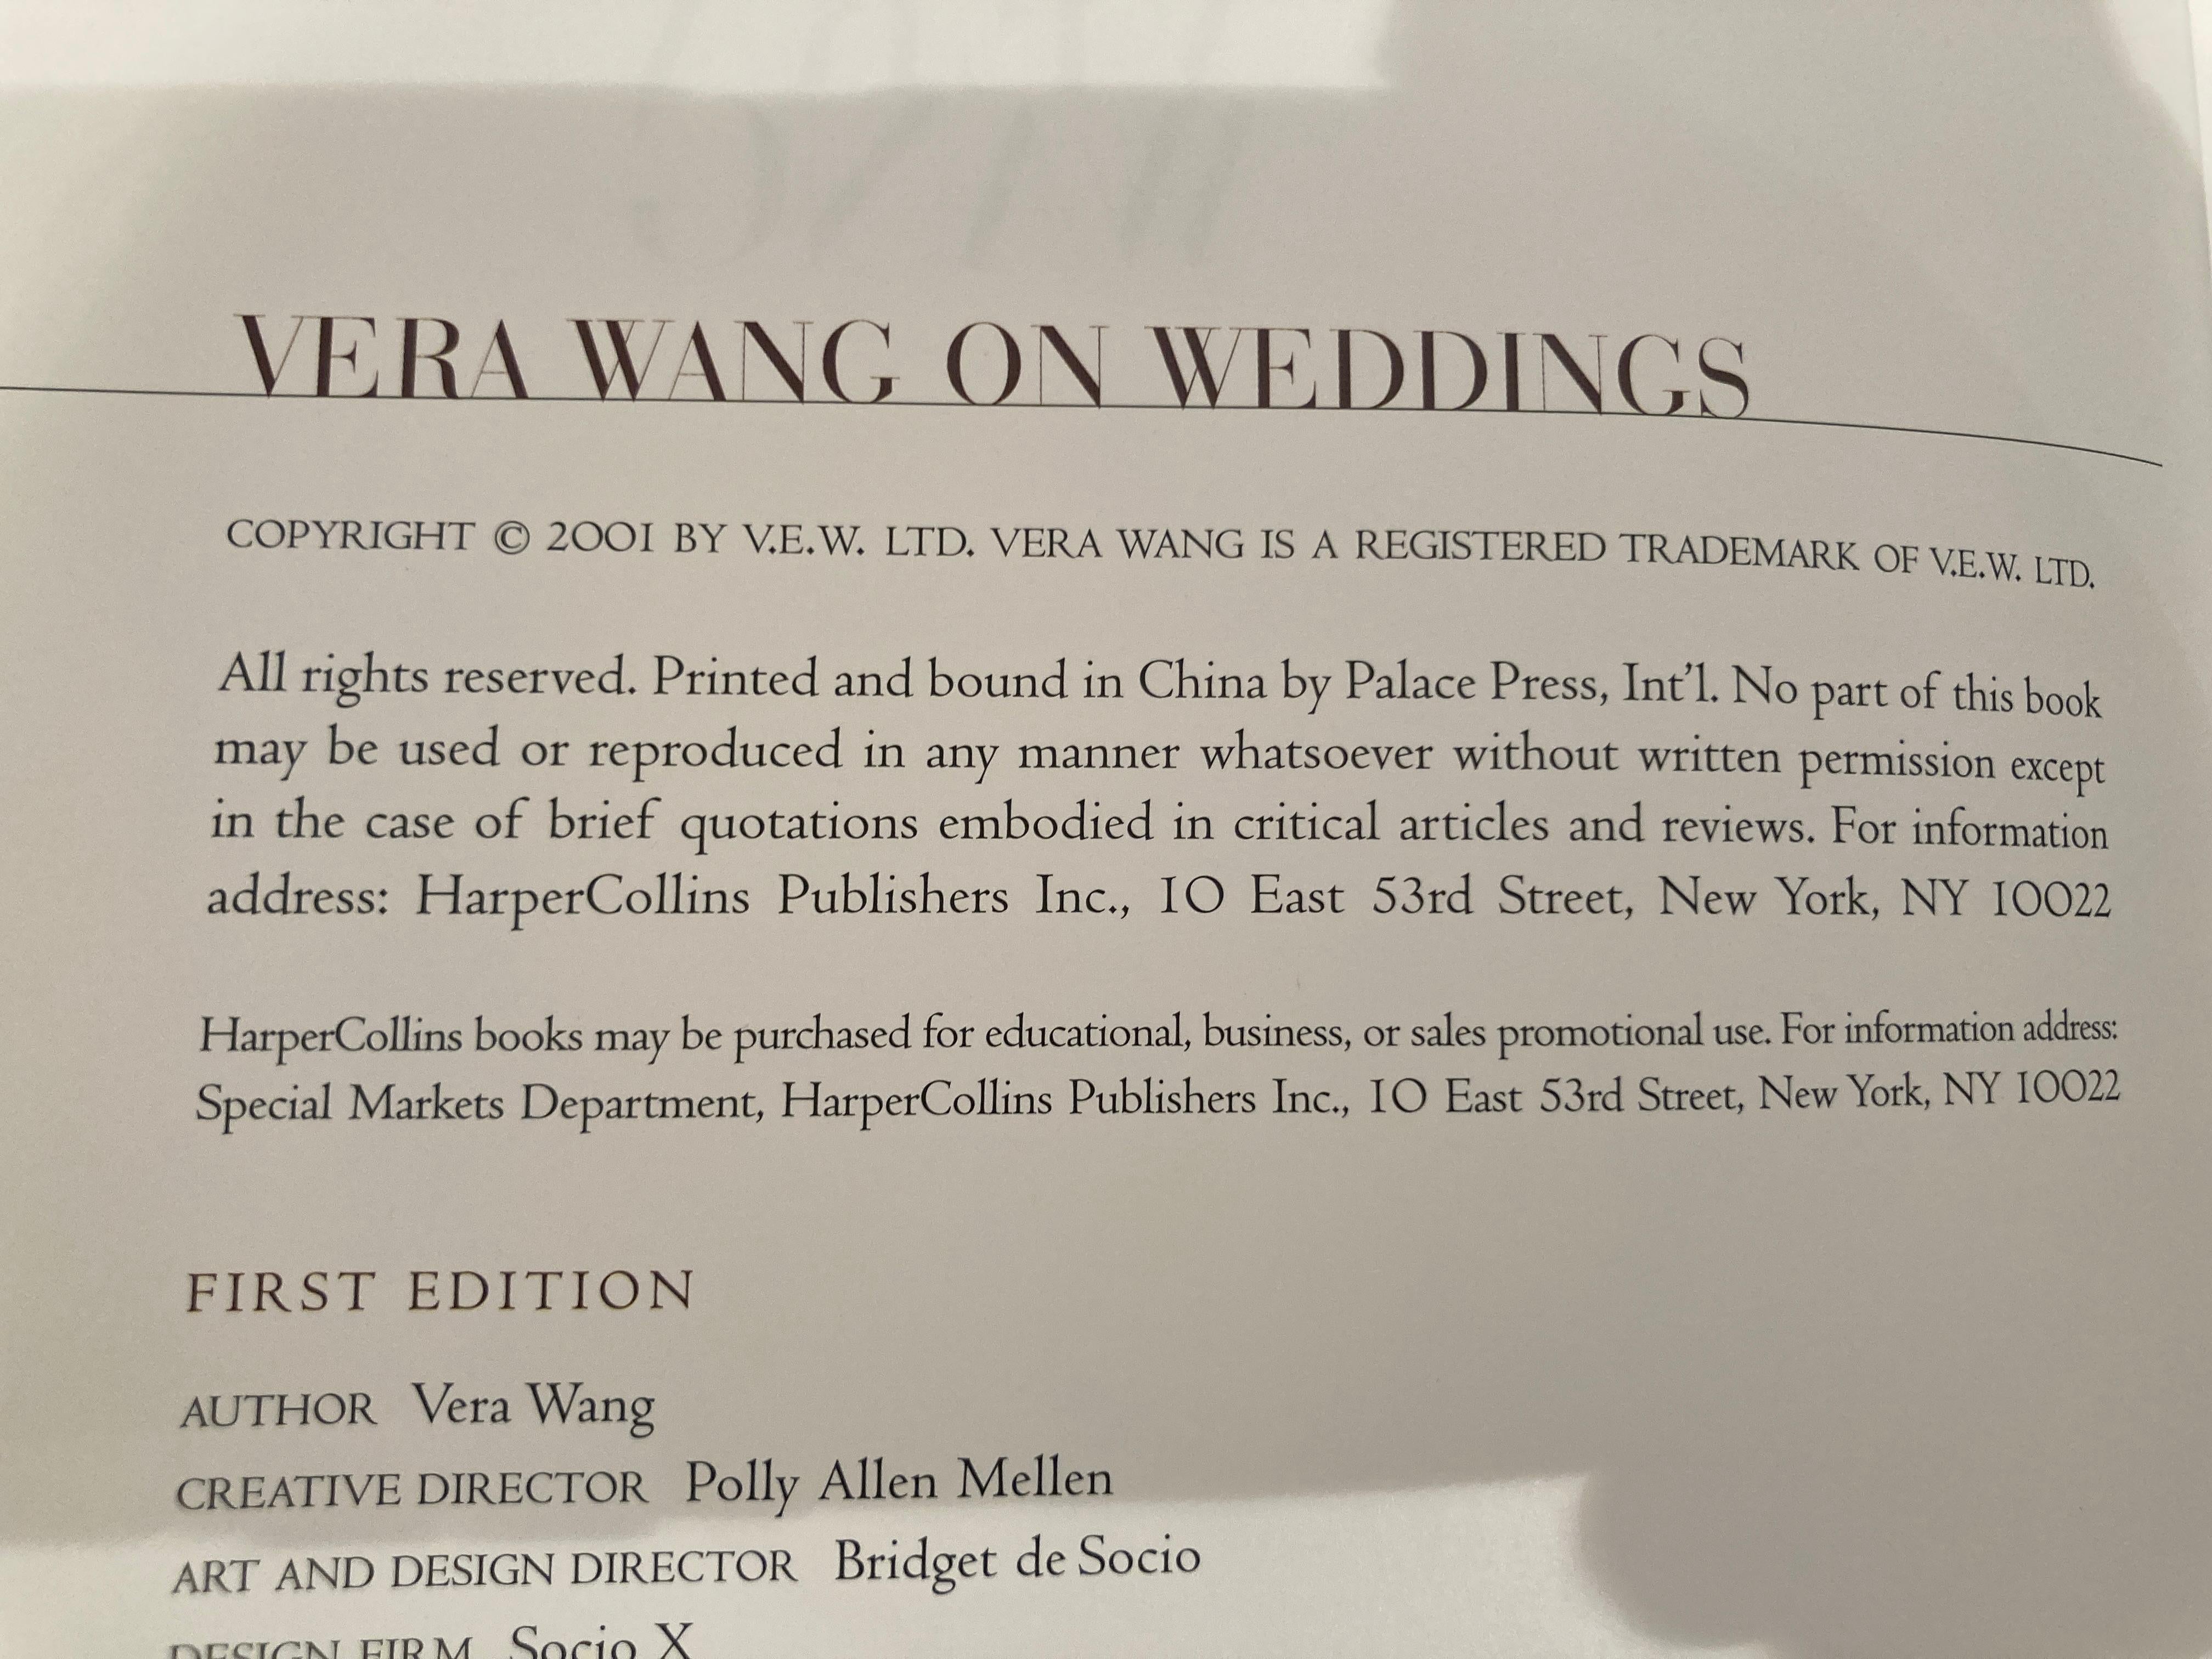 Vera Wang On Weddings by Vera Wang Large Hardcover Book In Good Condition For Sale In North Hollywood, CA